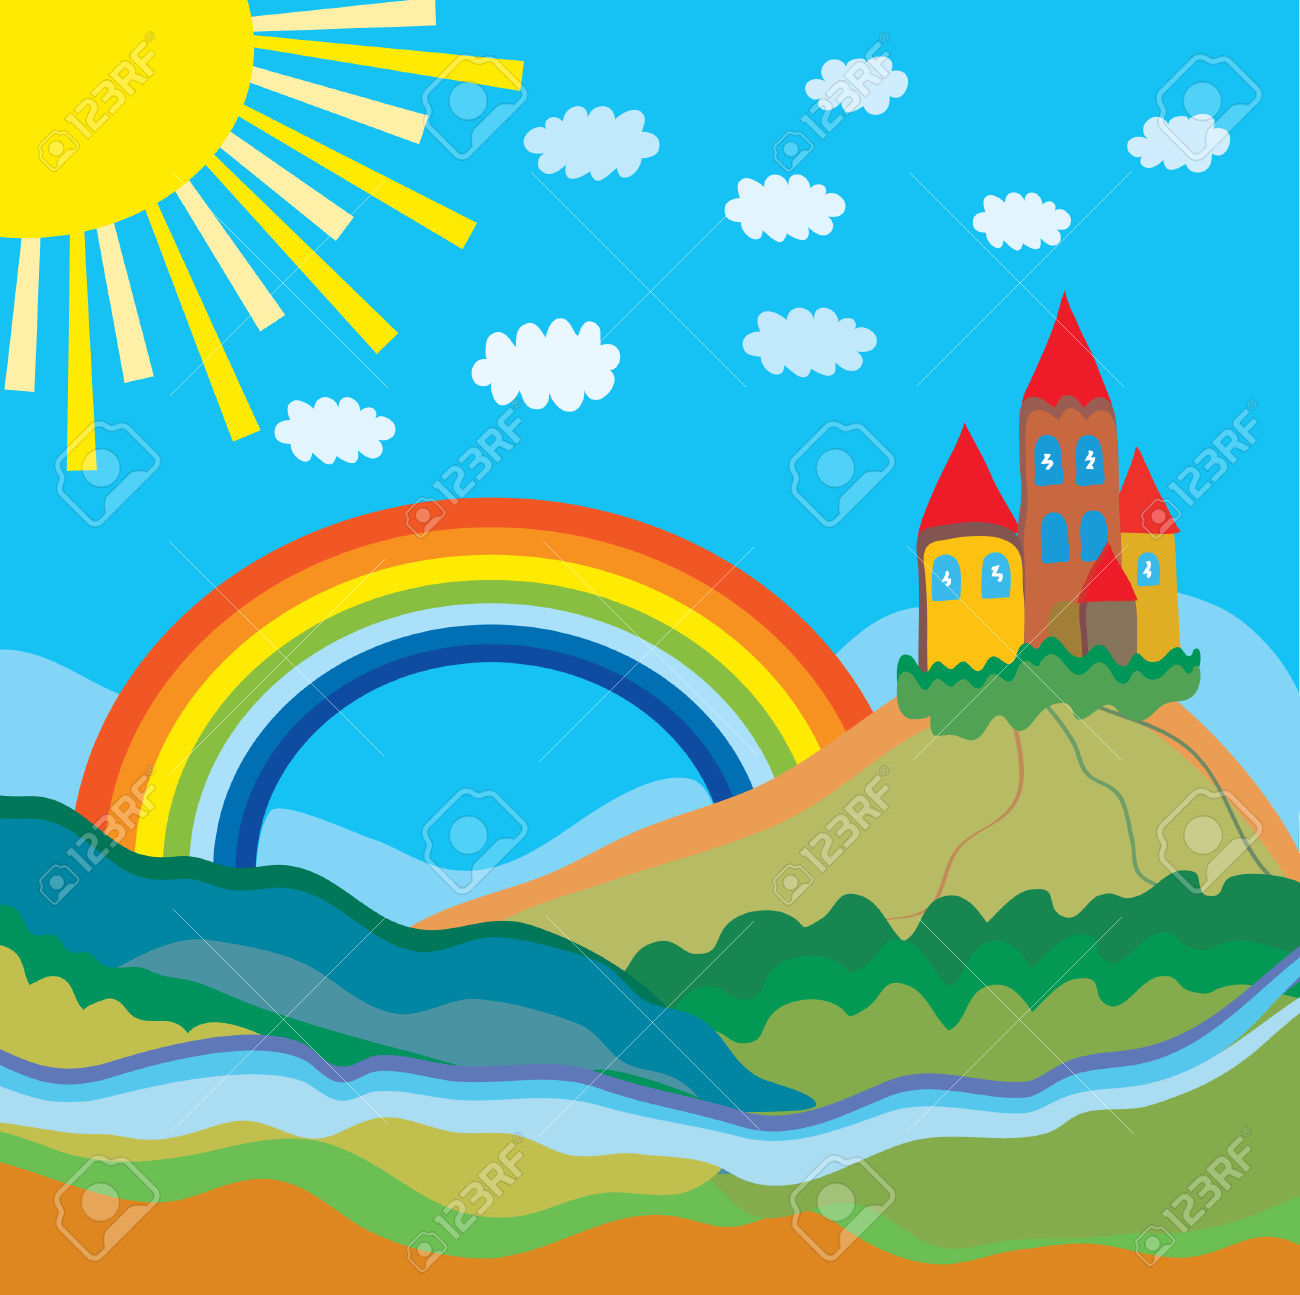 Collection of Scenery clipart.